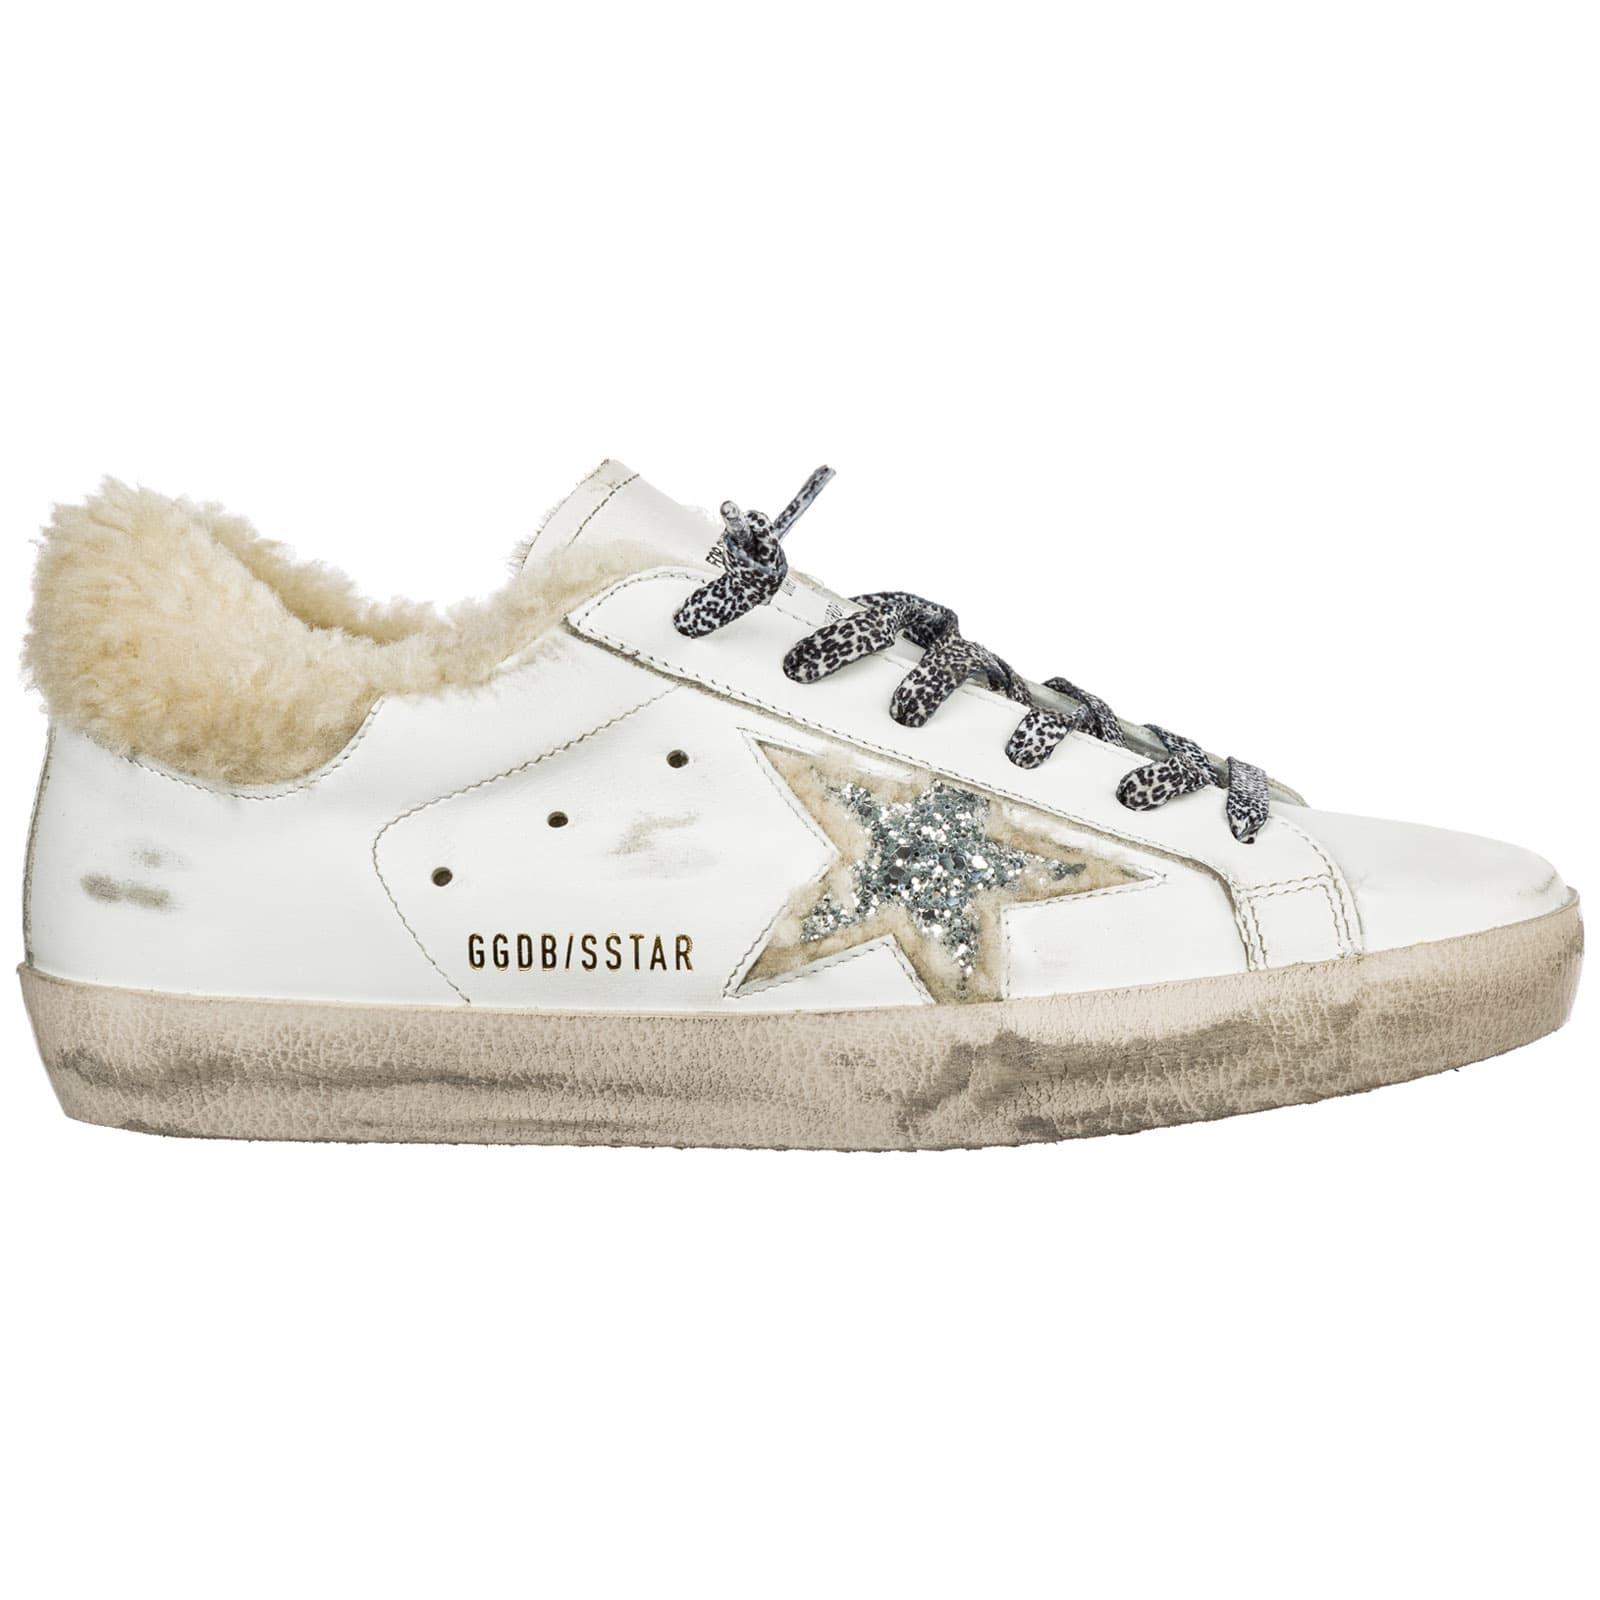 Golden Goose Golden Goose Shoes Leather Trainers Sneakers Superstar ...